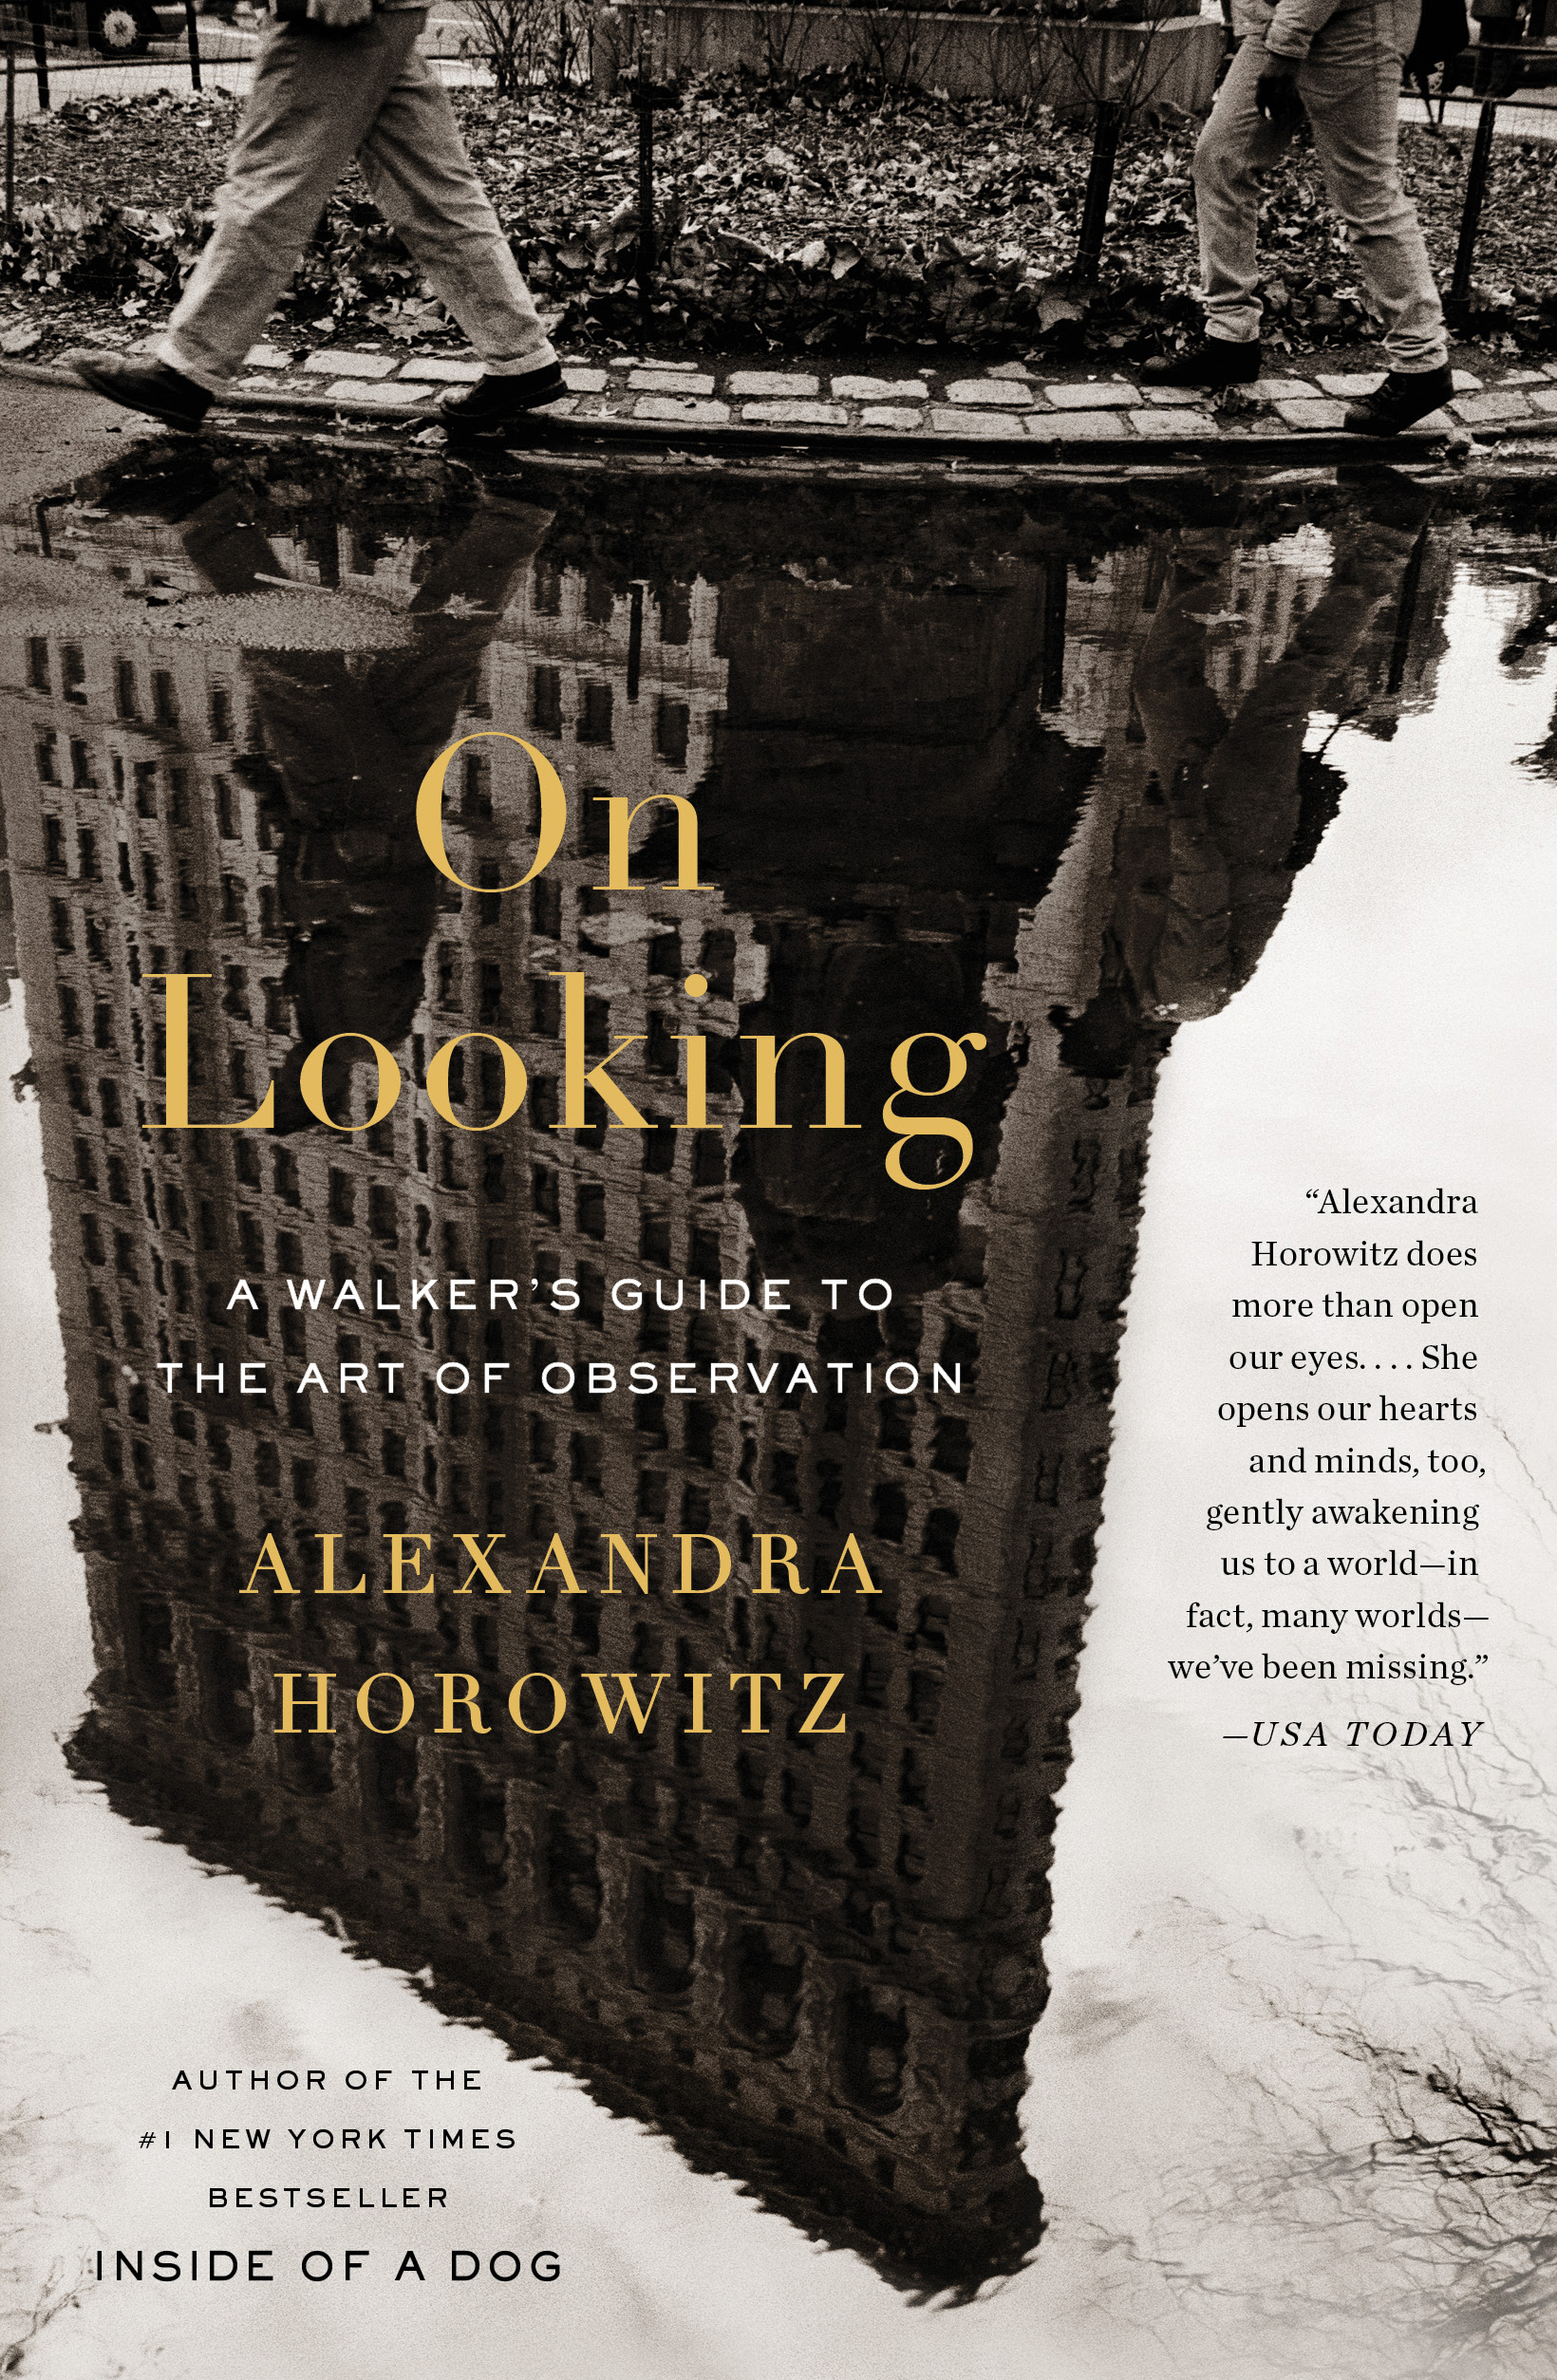 On Looking: A Walker’s Guide to the Art of Observation